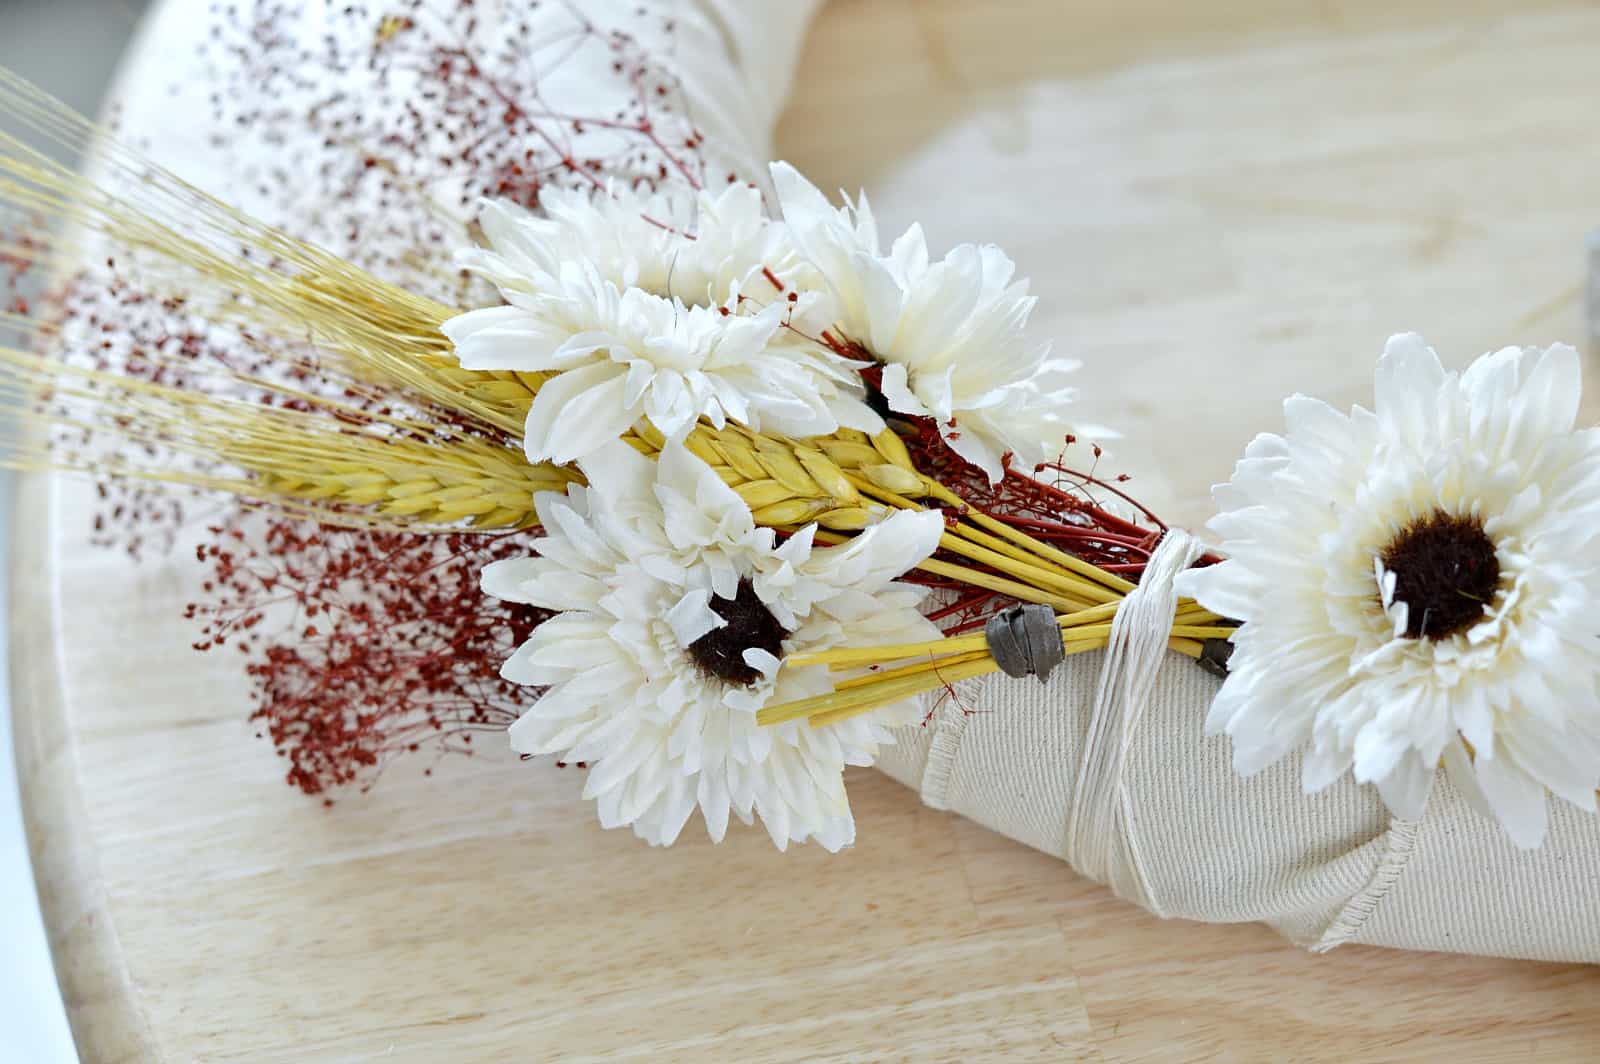 tie wheat to the wreath using twine or string